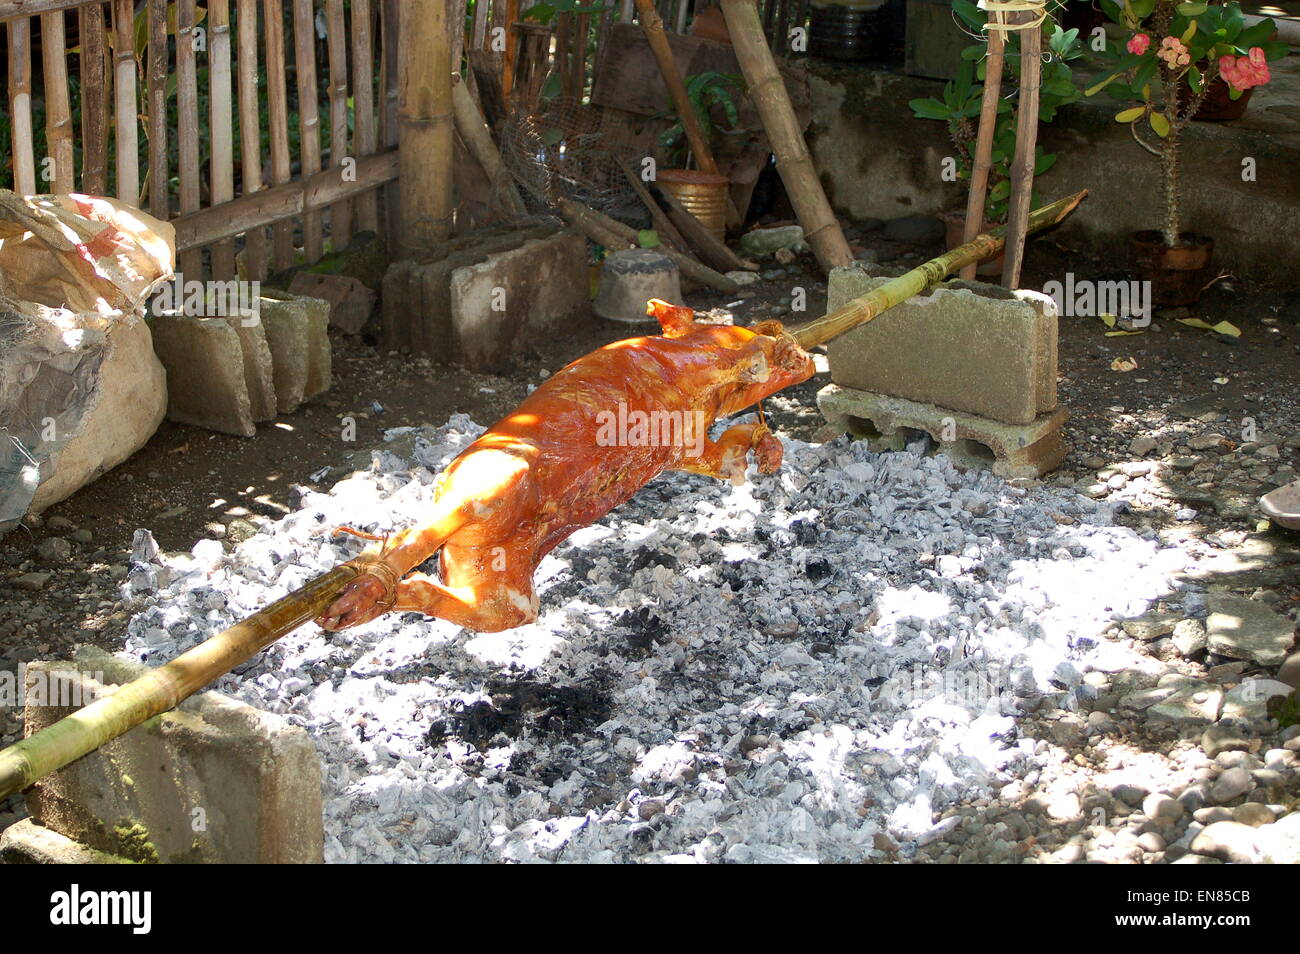 A whole pig being spit roast over charcoal. Stock Photo